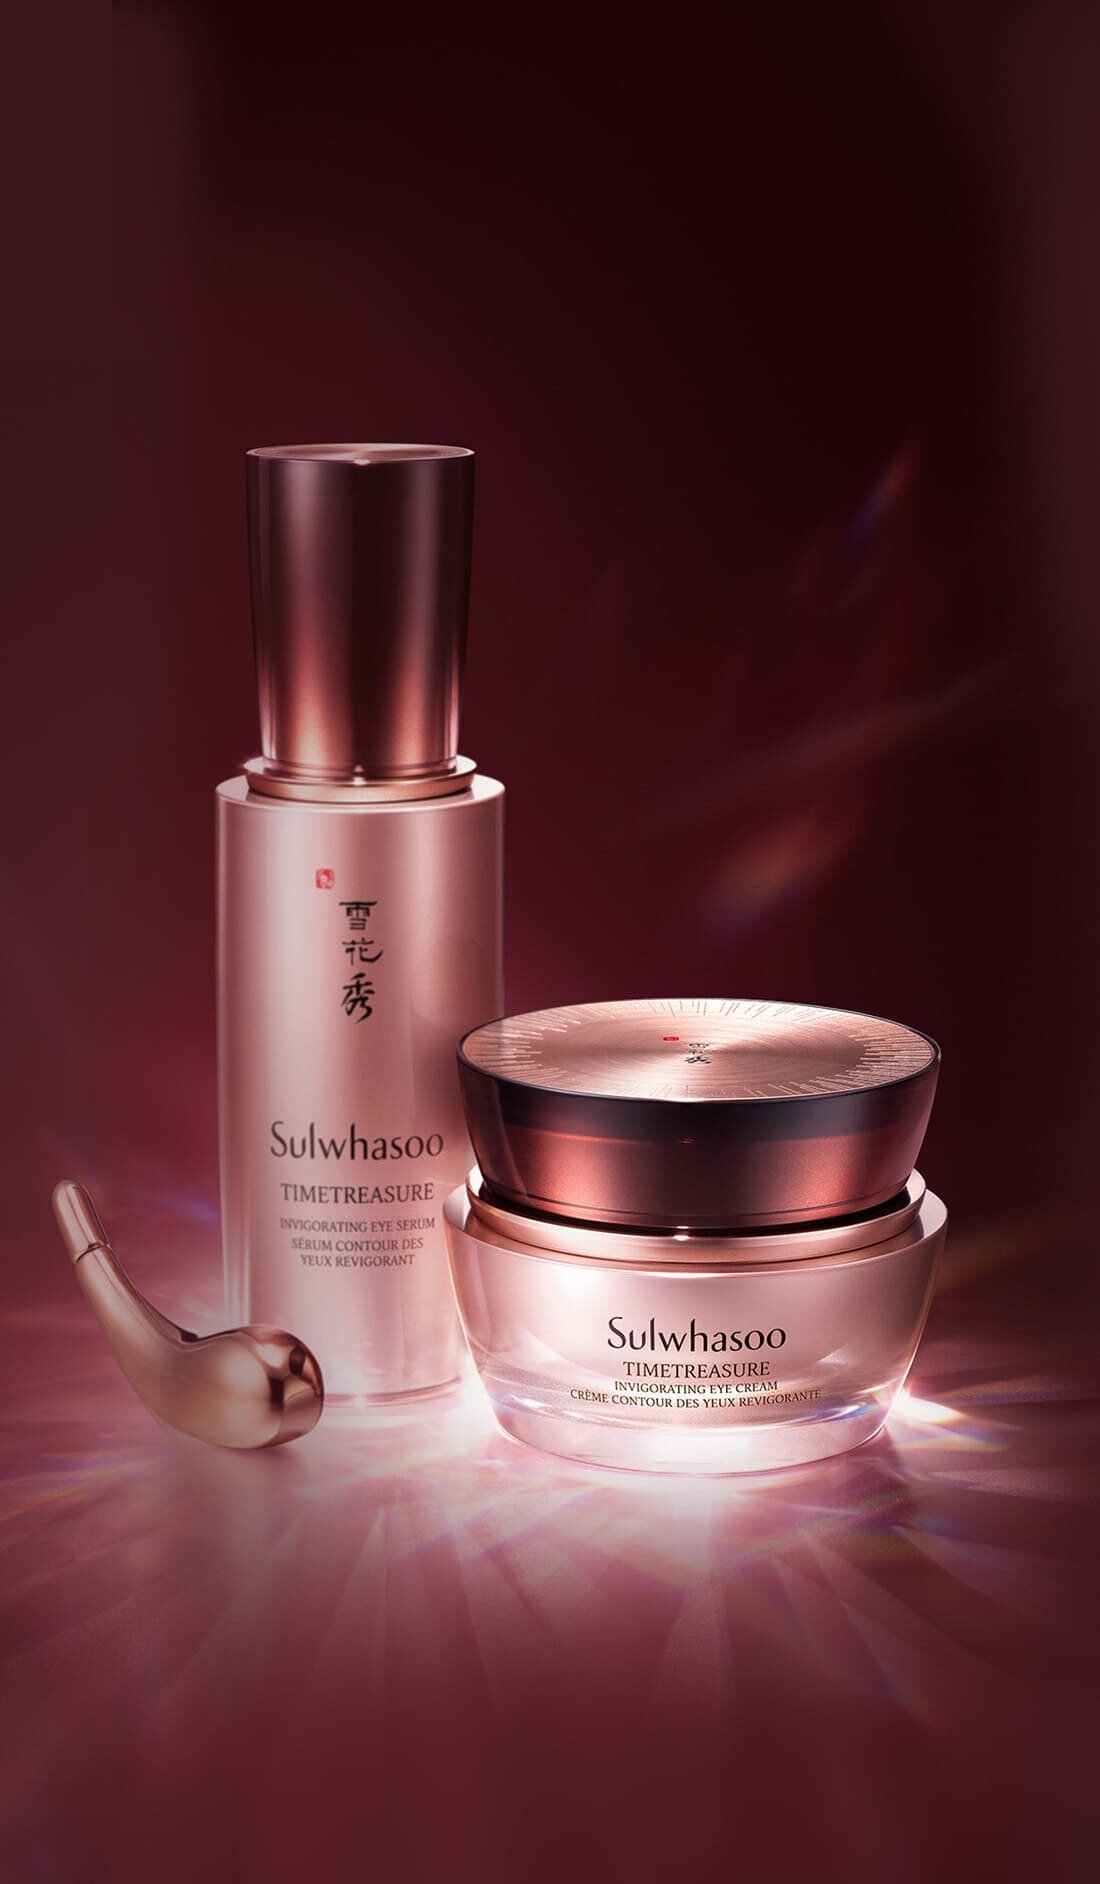 Sulwhasoo Timetreasure Invigorating Eye Serum refreshing, skin strengthening antioxidants serum wakes up tired eyes on contact by pairing concentrated Korean red pine with a cooling gold massager. Used together, delicate under-eye skin looks instantly resilient, depuffed with a hydrated, smooth finish.